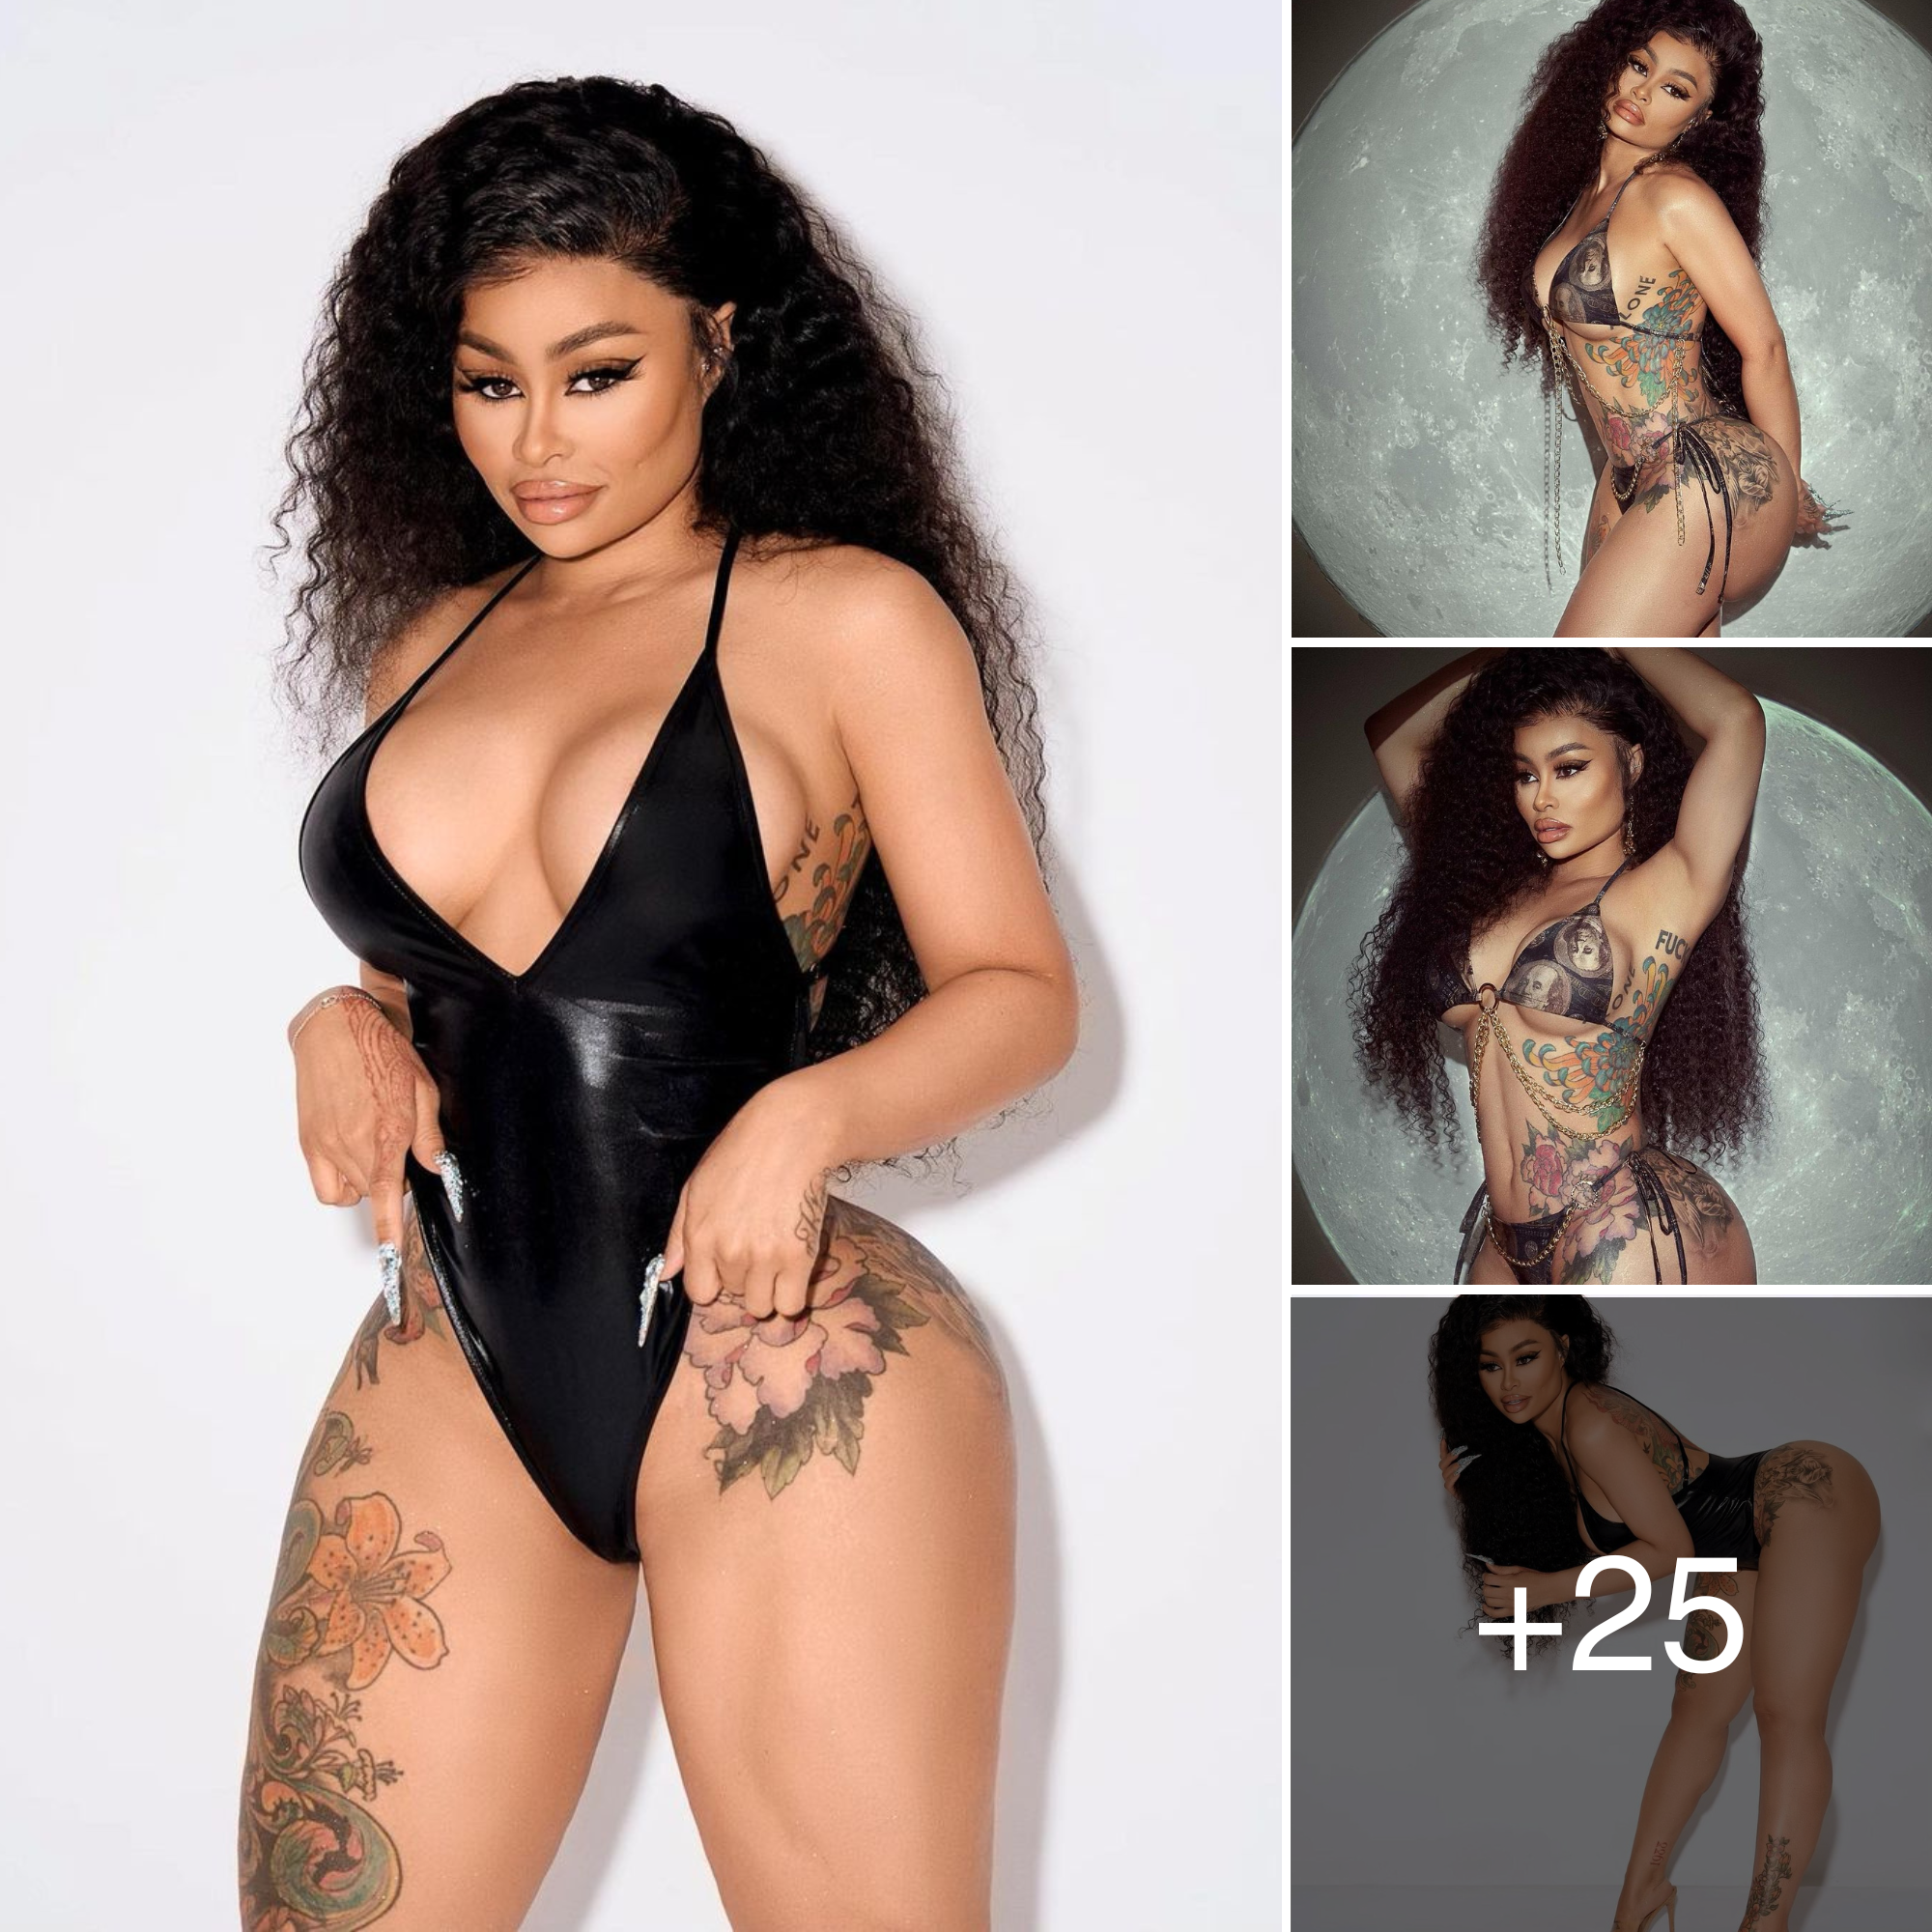 Blac chyna fans only pictures